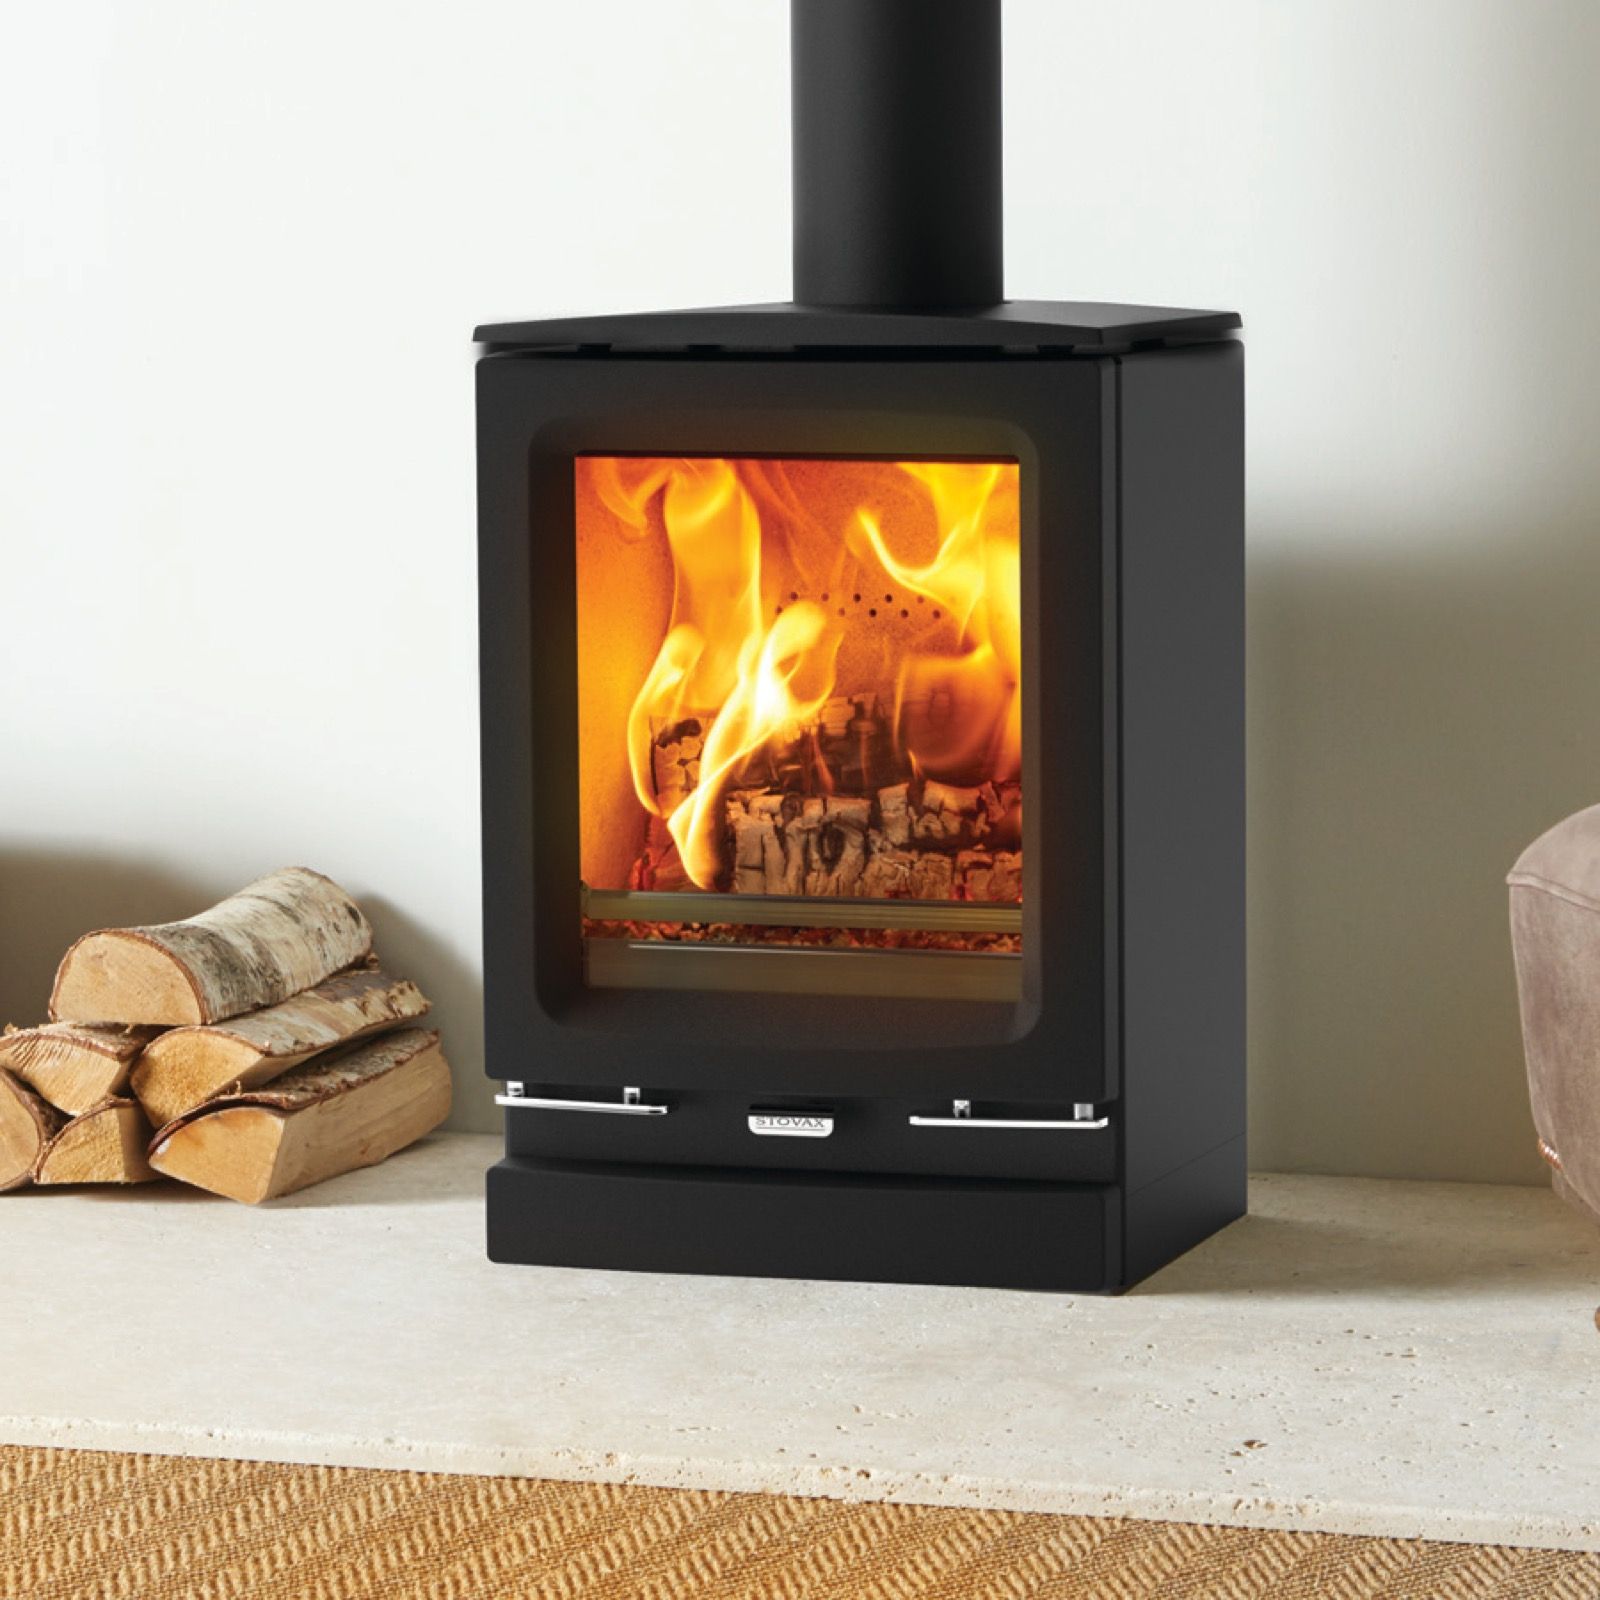 Burning Wood In Fireplace New Stovax Vogue Small Wood Burning Stove with Cast Iron top